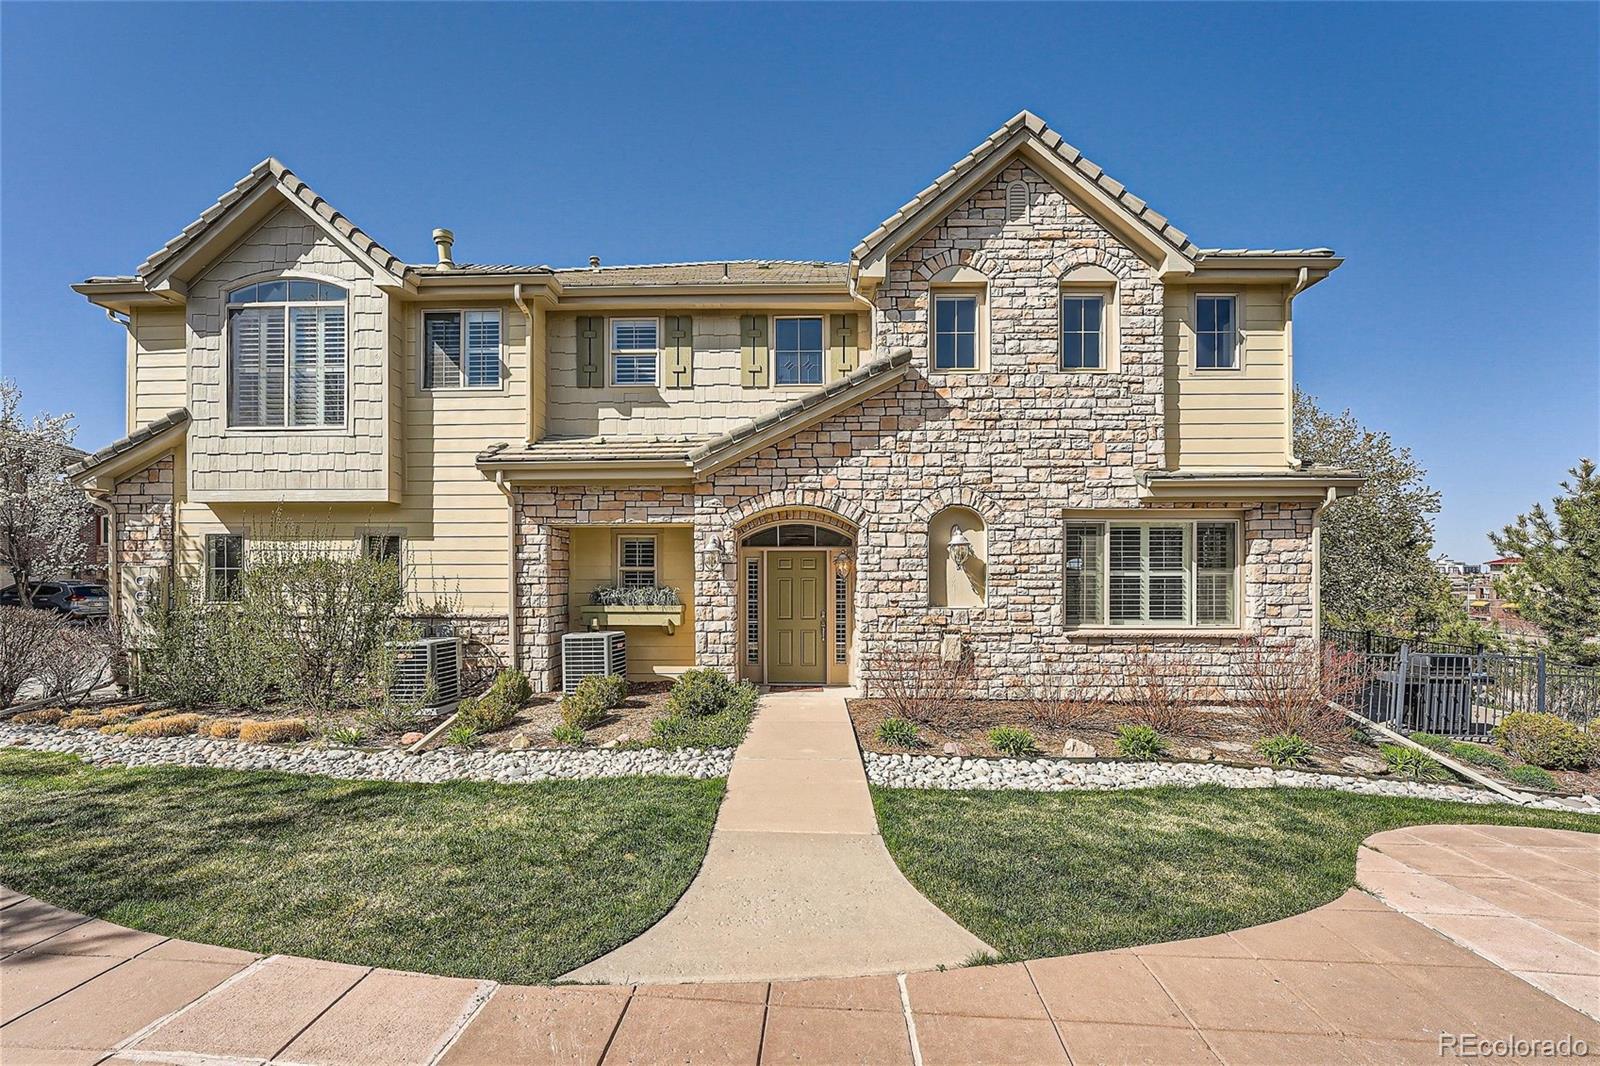 10118  bluffmont lane, lone tree sold home. Closed on 2024-05-10 for $699,500.